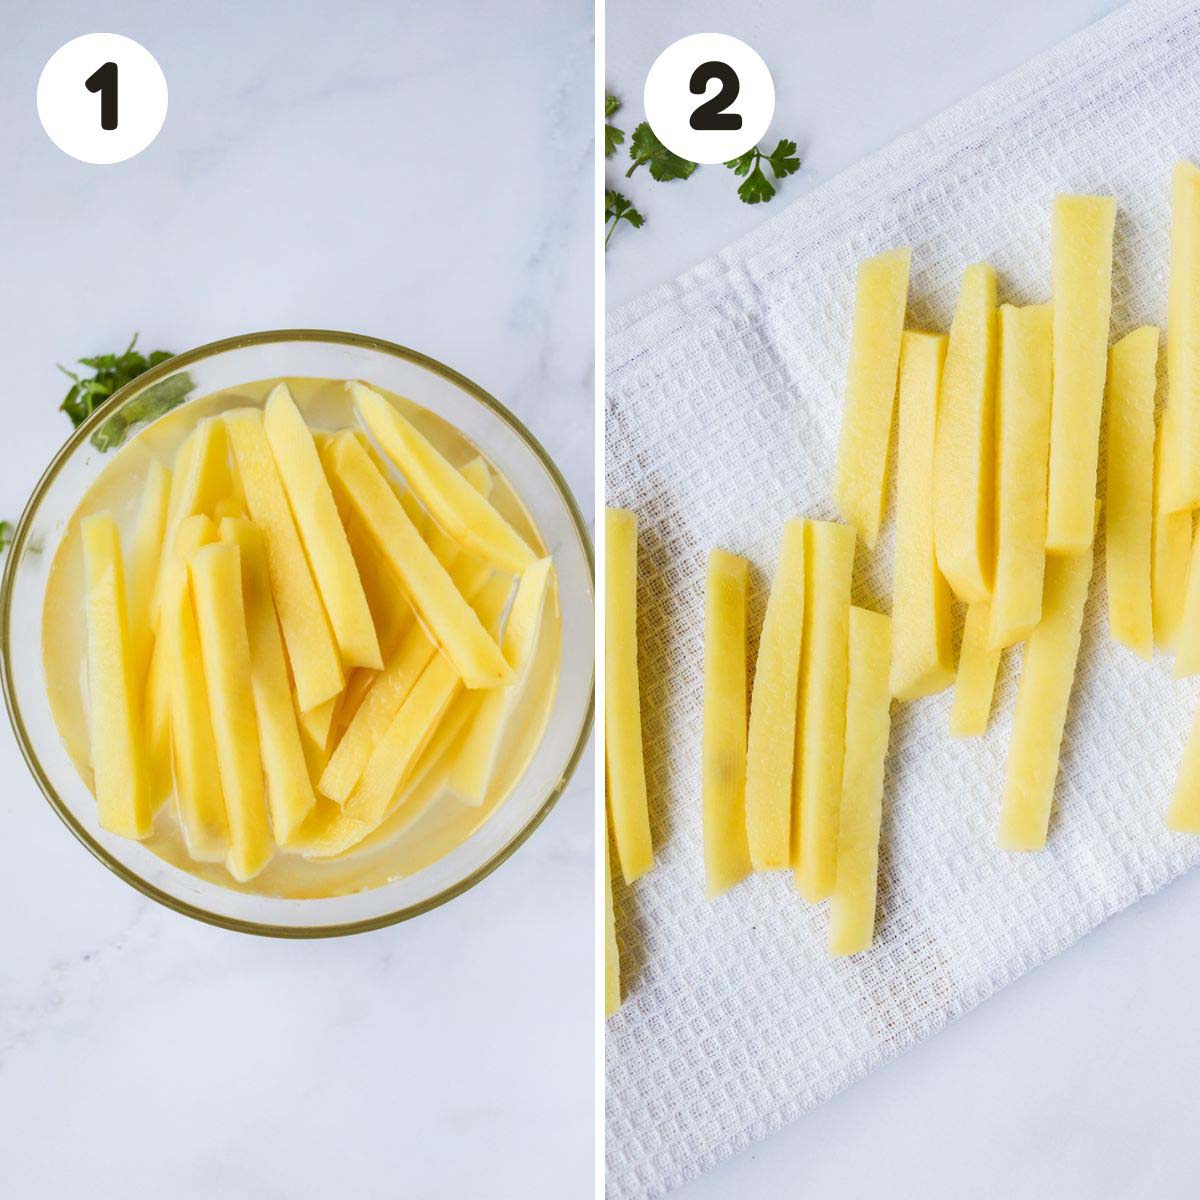 Steps to make the truffle fries.